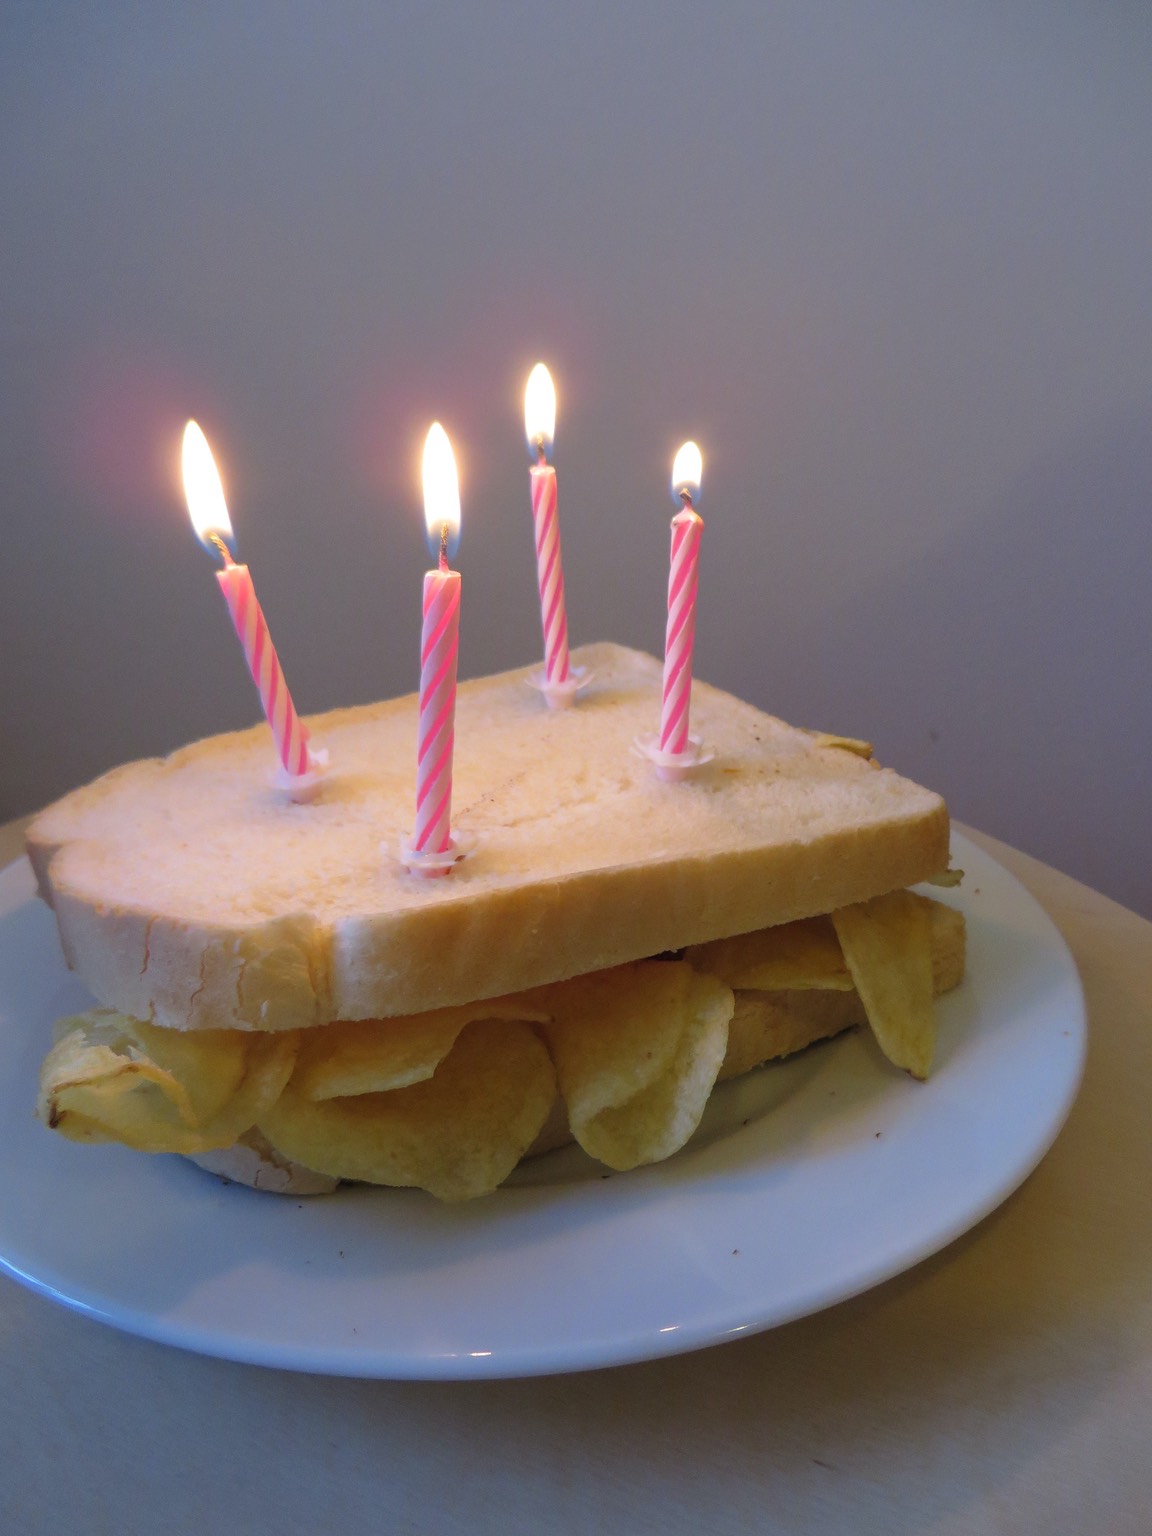 Four birthday candles on a white crisp sandwich